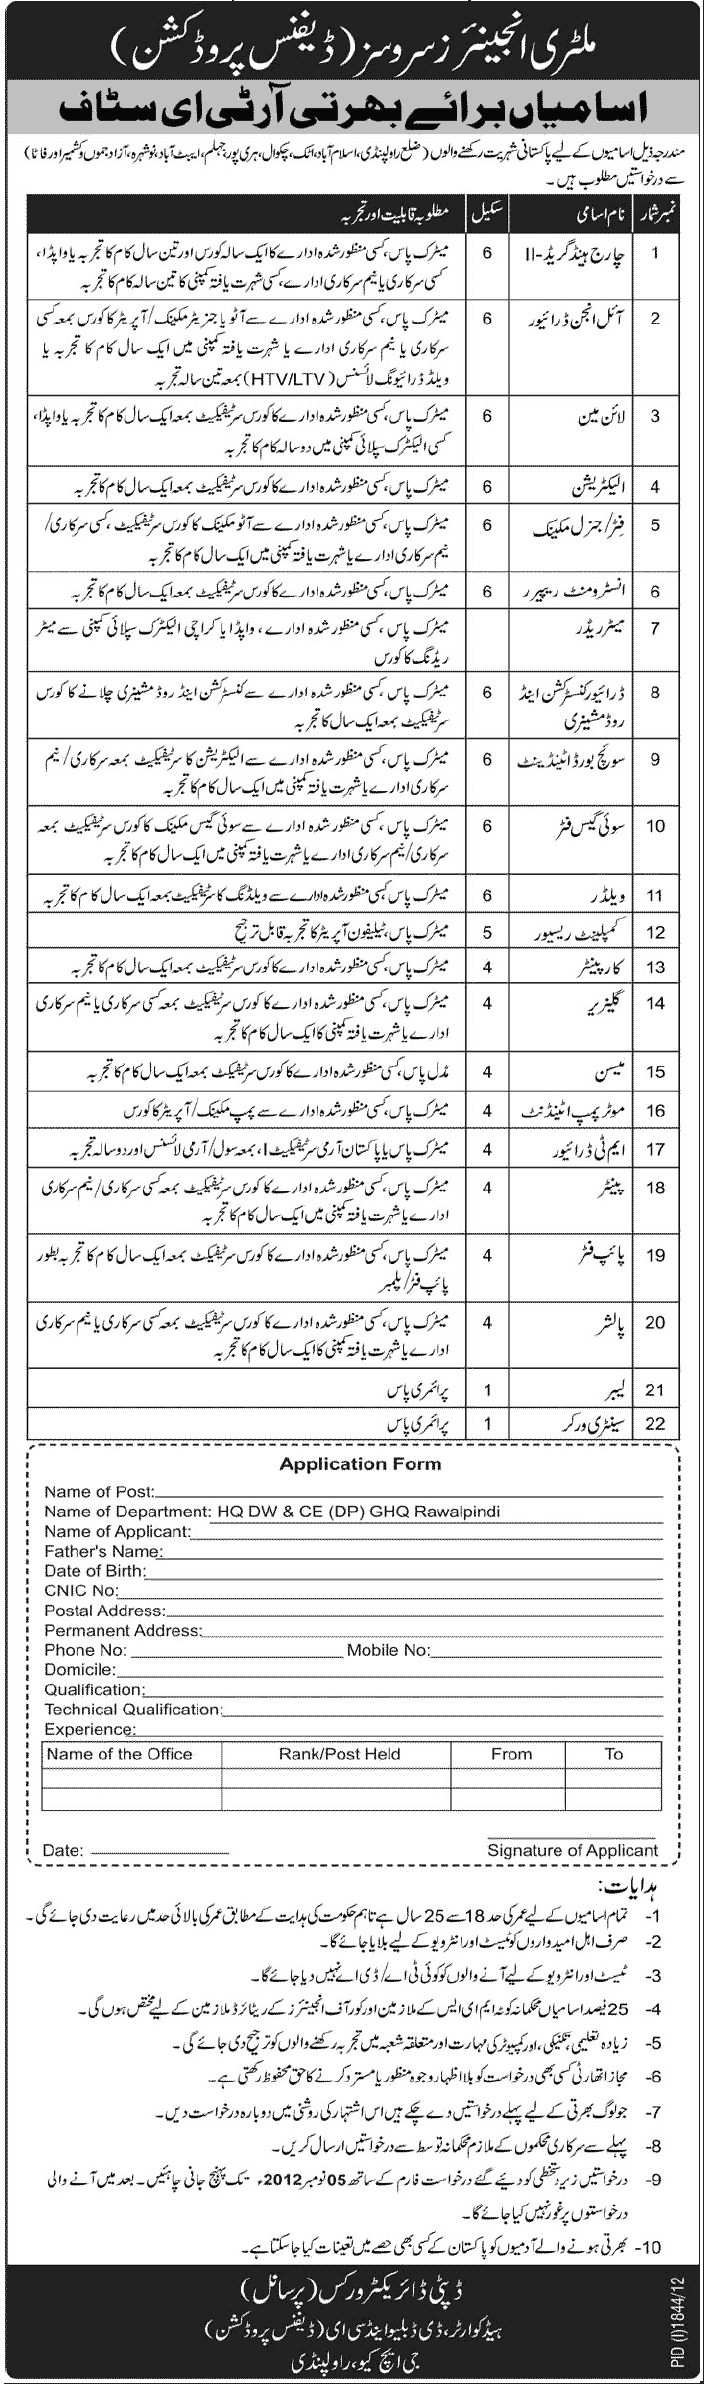 Jobs in Military Engineer Services (Defence Production)